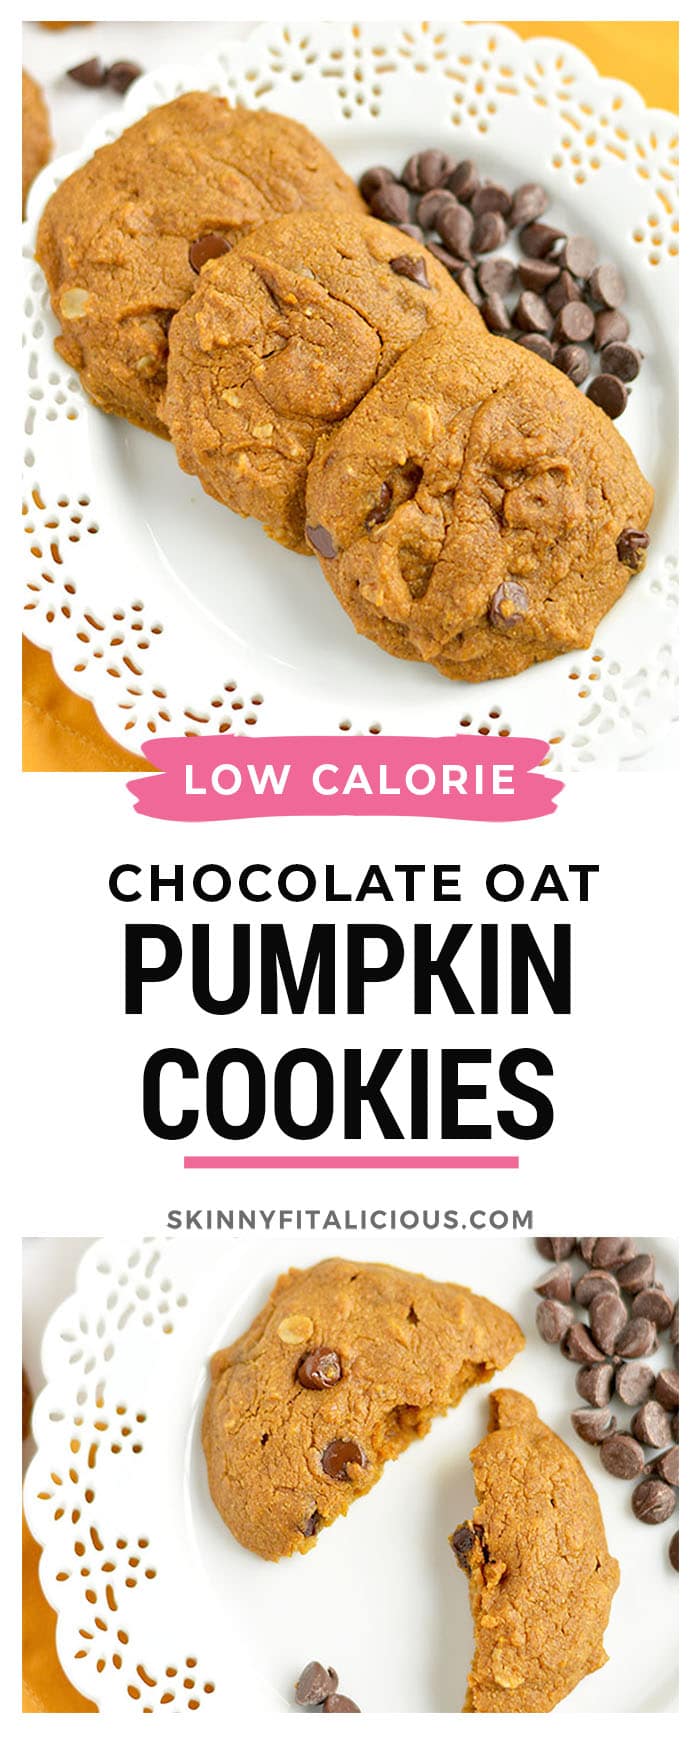 Perfectly soft baked Pumpkin Chocolate Chip Oatmeal Cookies made healthy with whole grains and no refined oil or sugar. A scrumptious treat that's easy to make with unbeatable flavor! Gluten Free + Low Calorie + Vegan